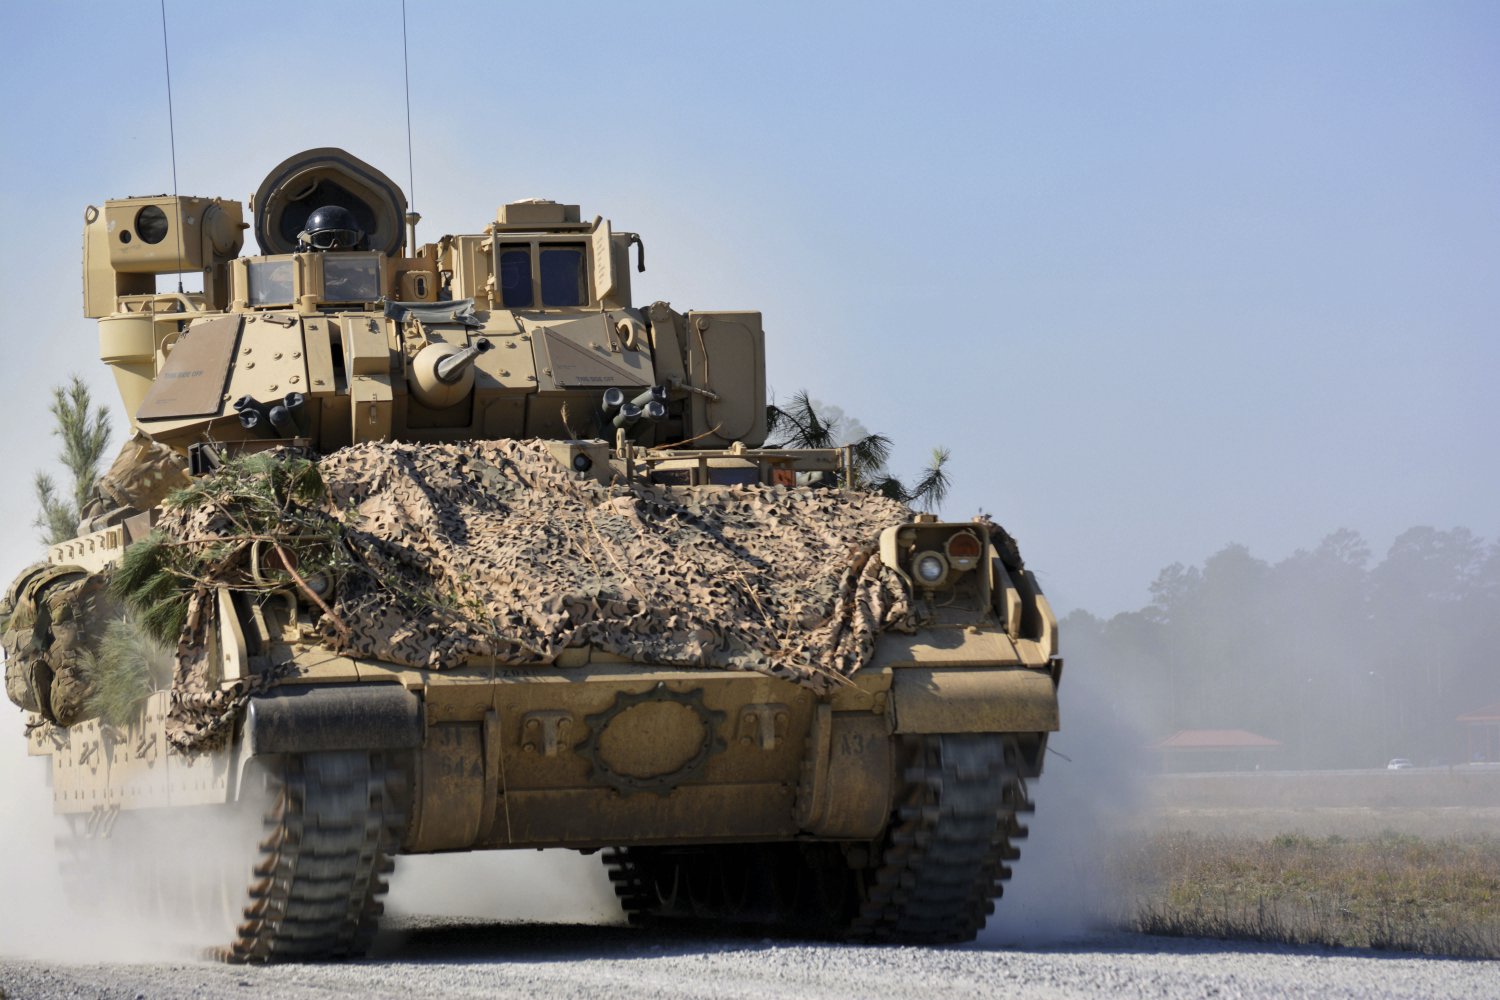 An M2A3 Bradley Fighting Vehicle from 1st Battalion, 64th Armor Regiment manoeuvres during a company Combined Arms Live-Fire Exercise at Fort Stewart, Georgia, on 7 February 2017. The OMFV is billed as a Bradley replacement. (US Army)